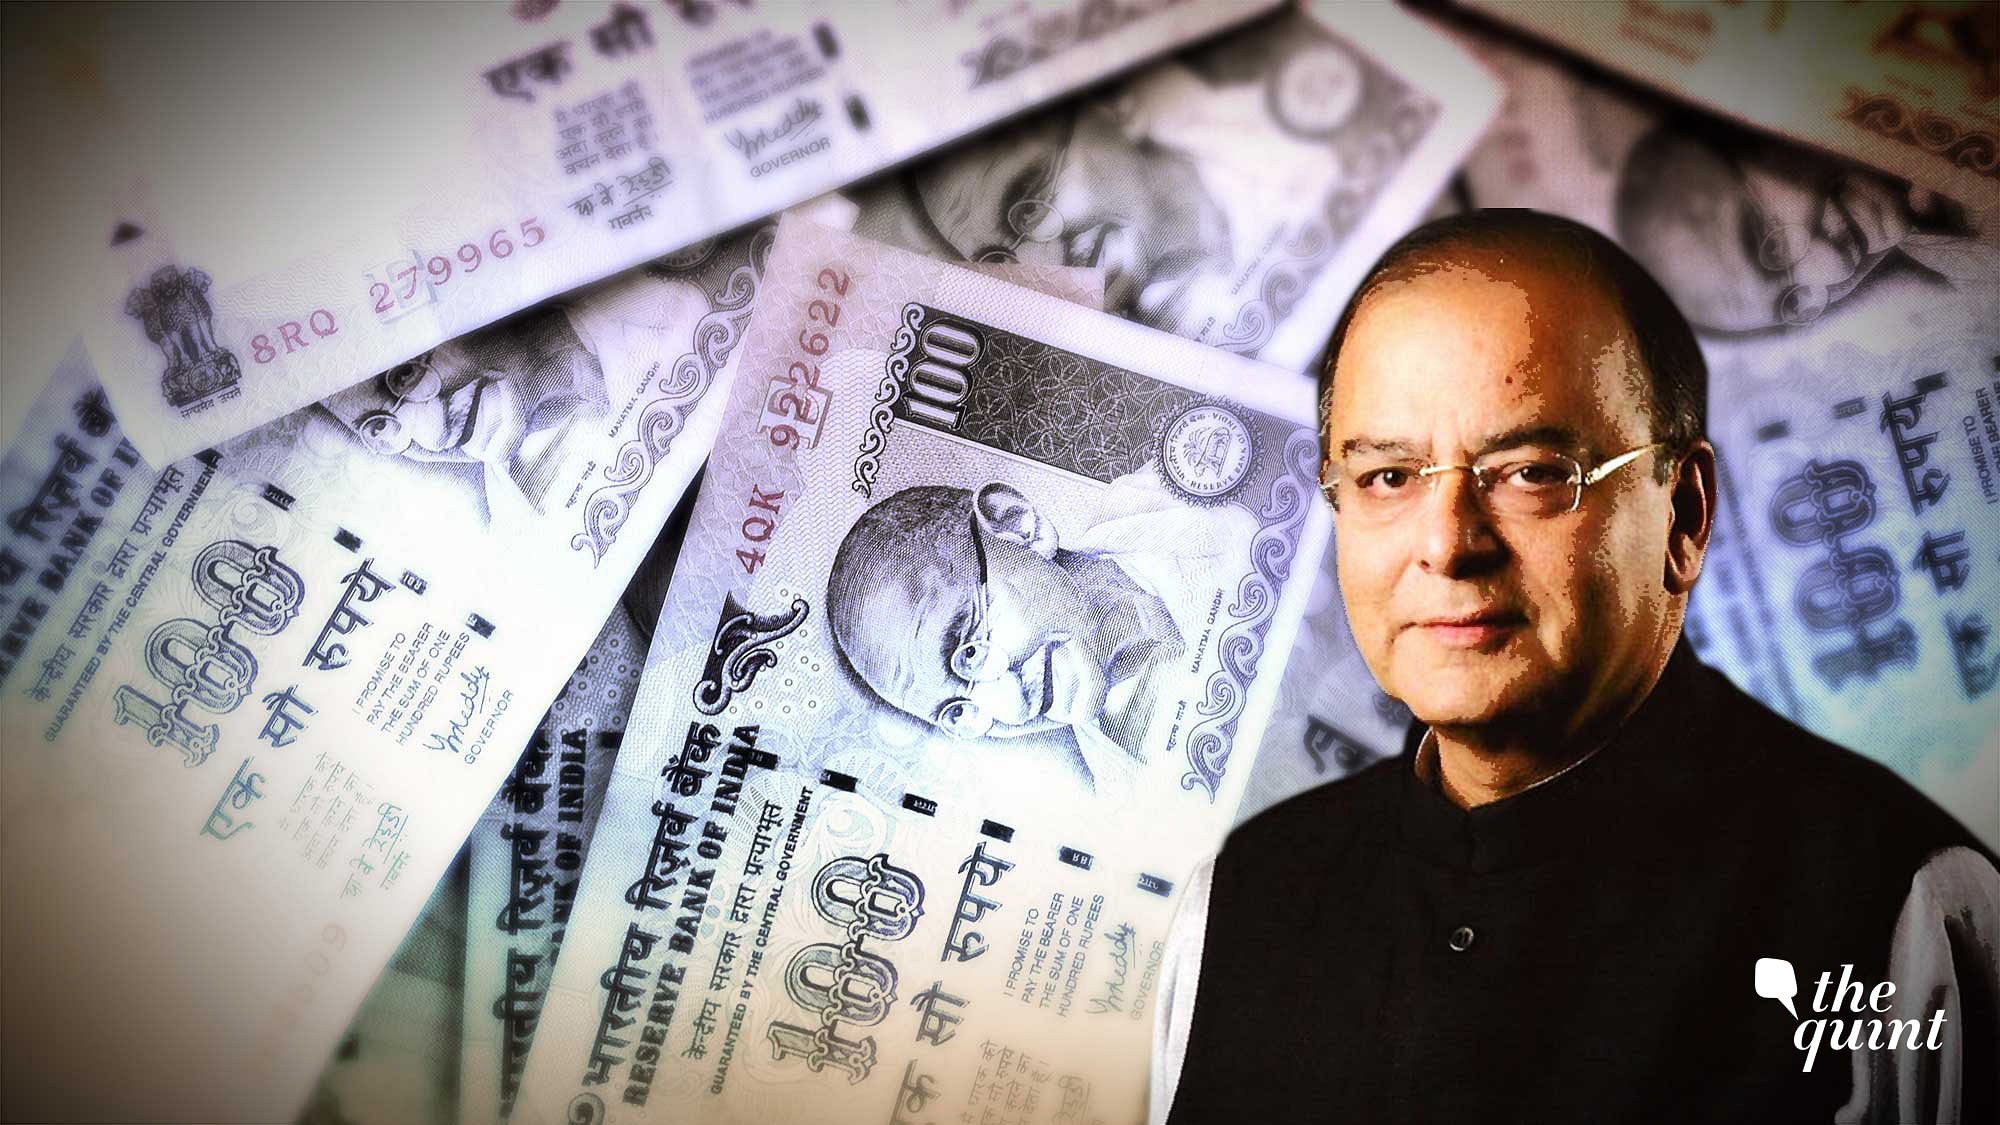 Image of Finance Minister Arun Jaitley used for representational purposes.